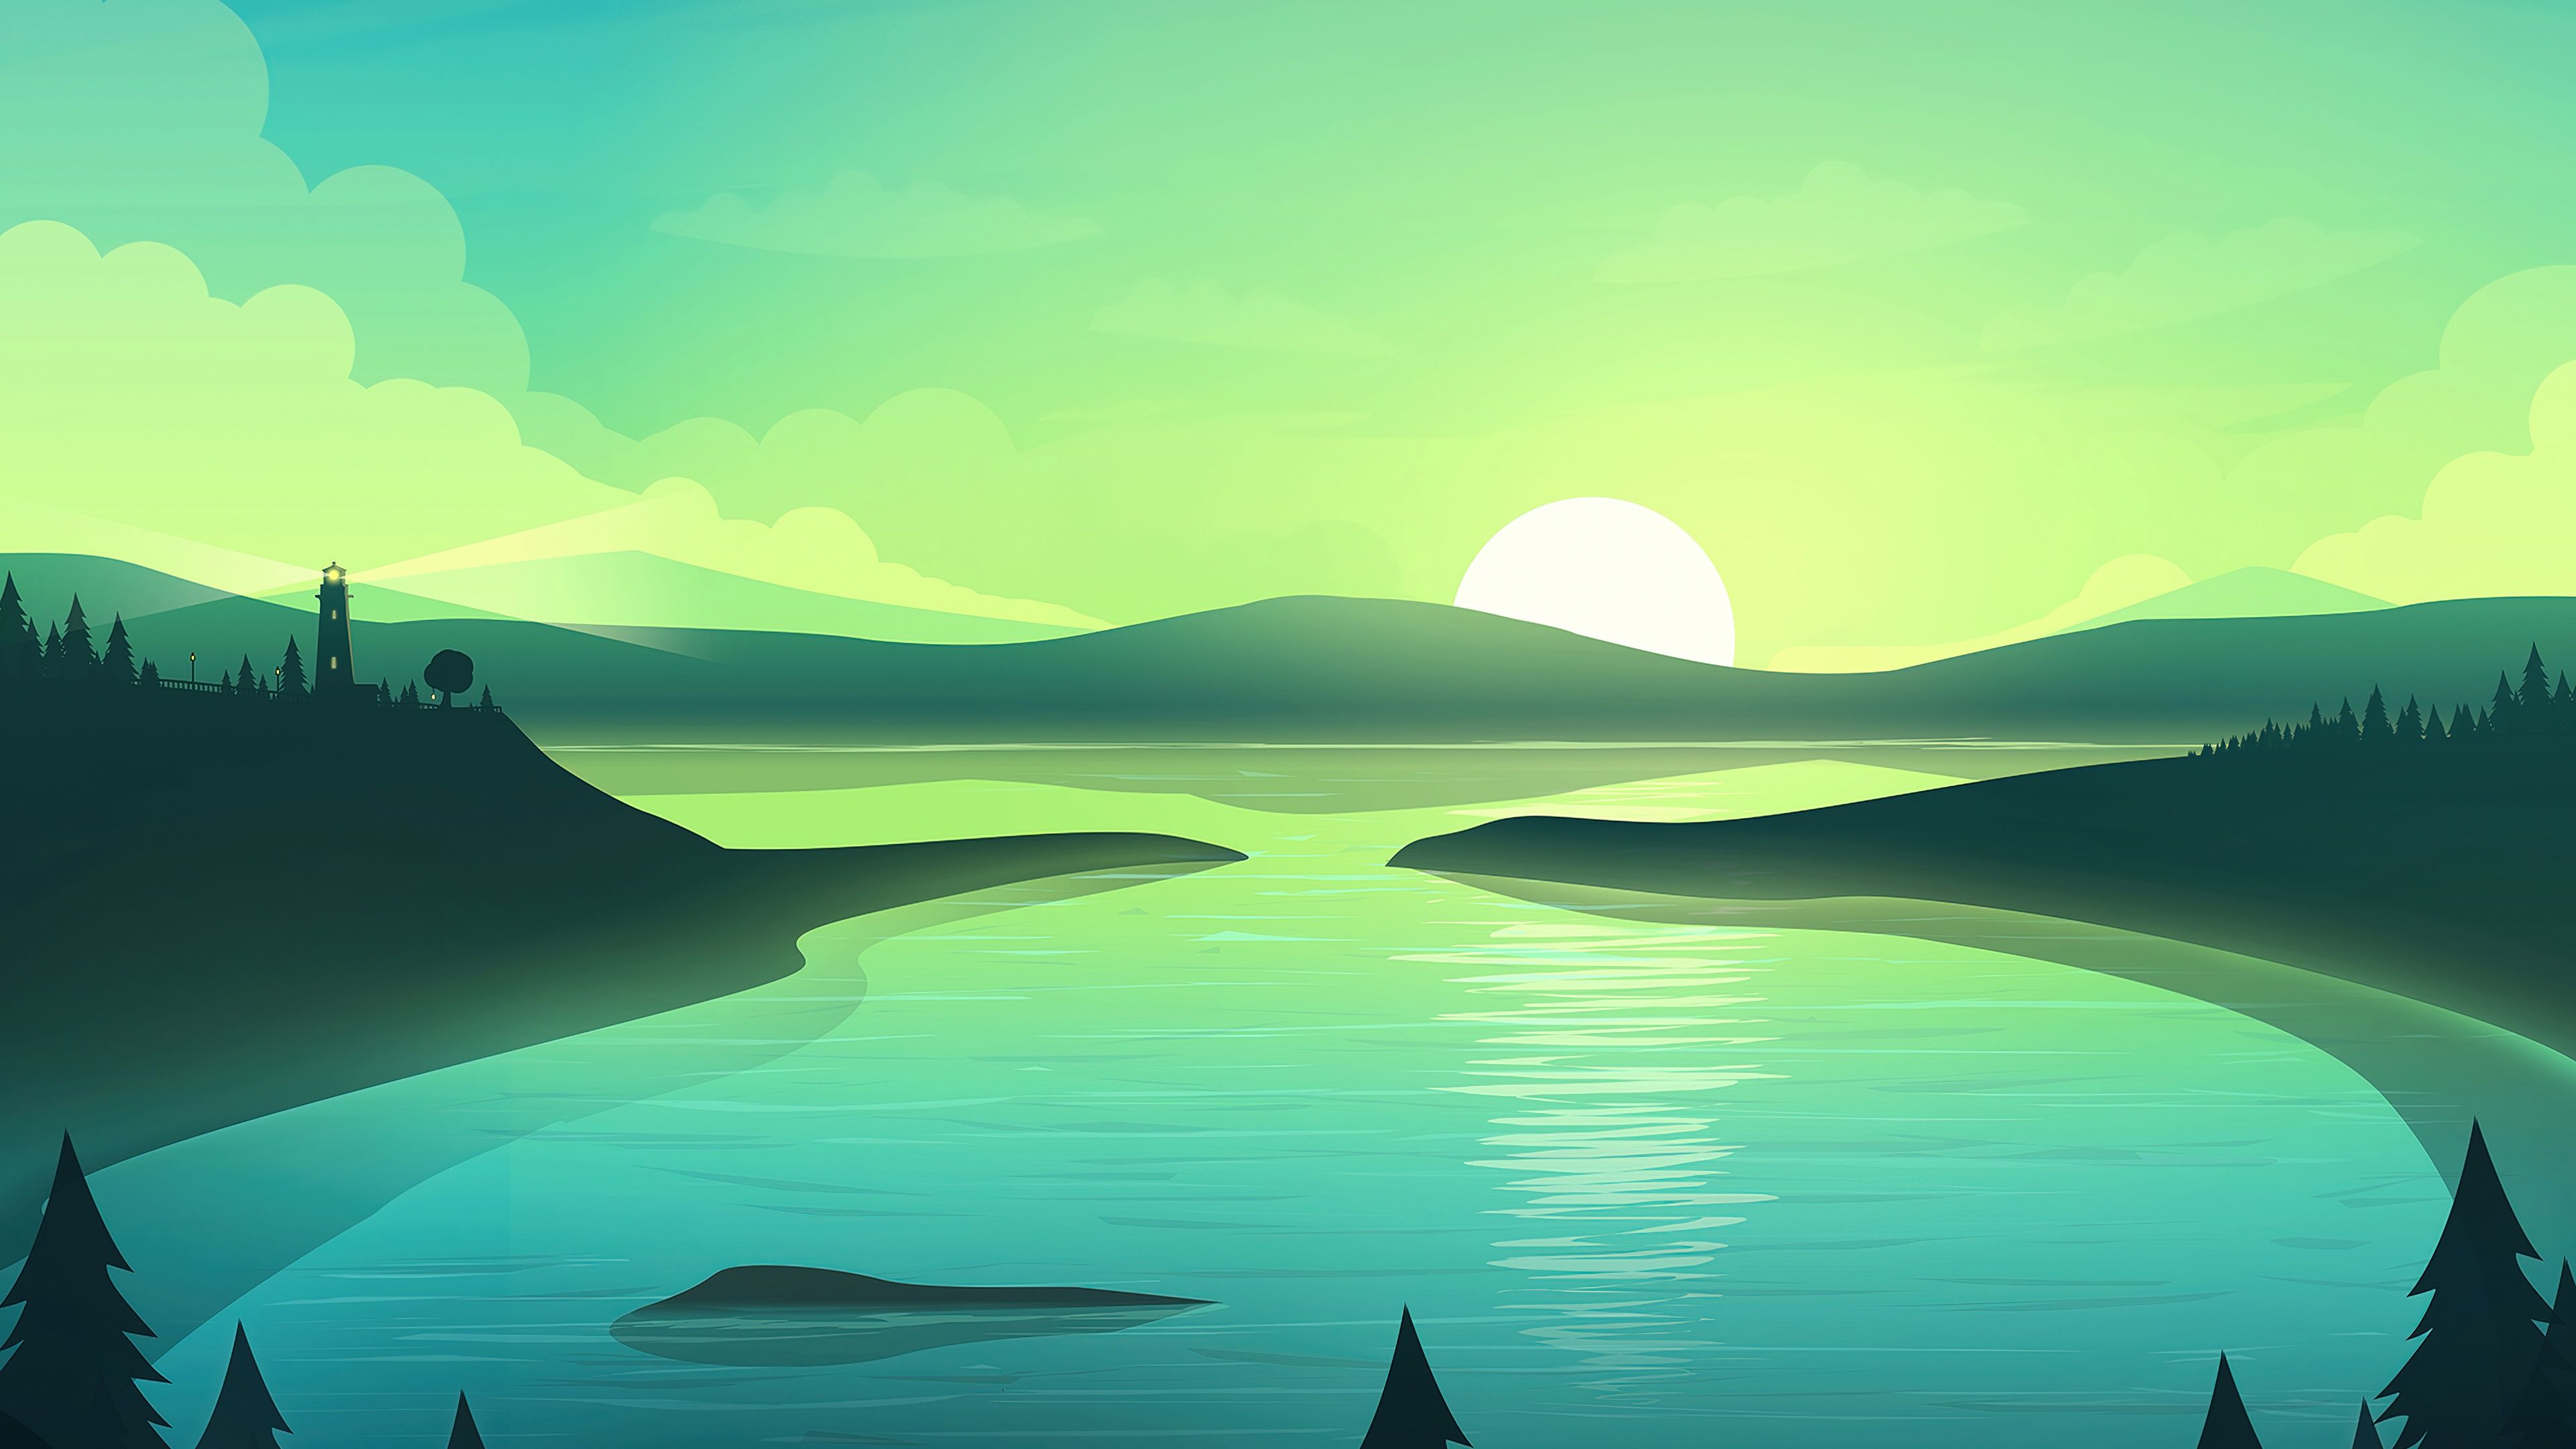 A landscape of a lake and mountains at sunset - Lake